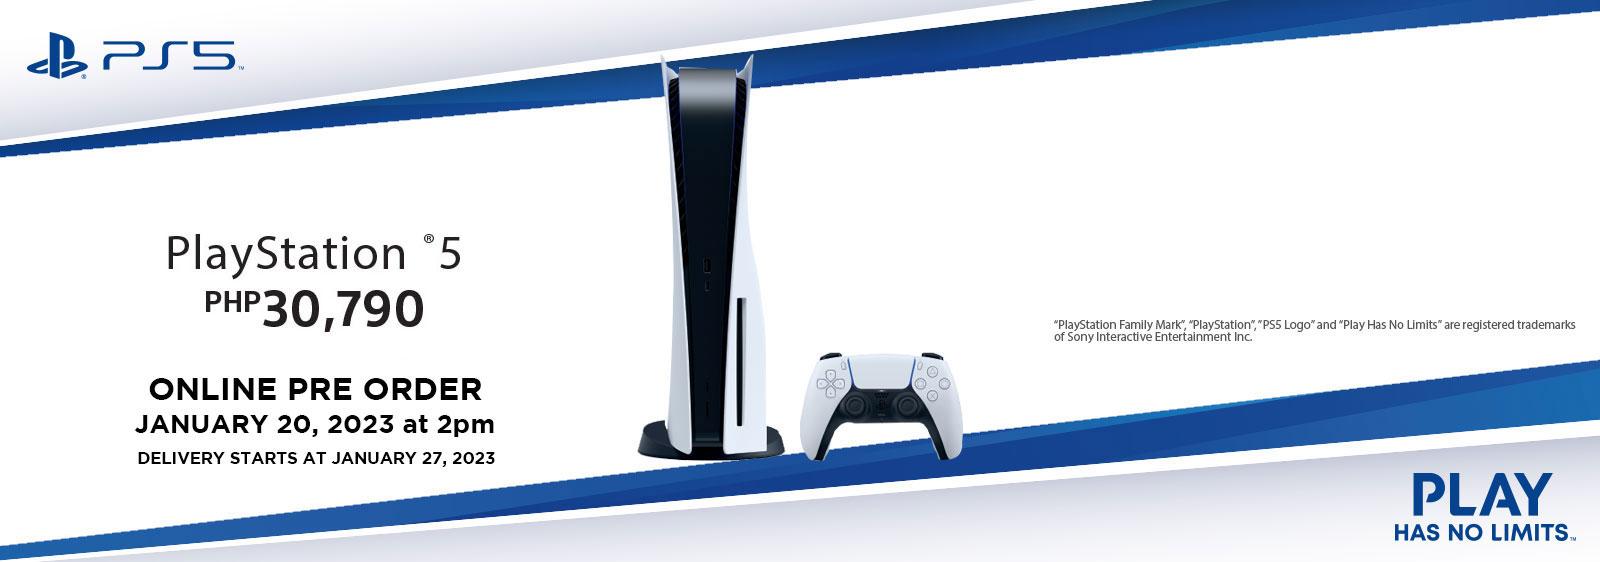 Sony Playstation-Banner